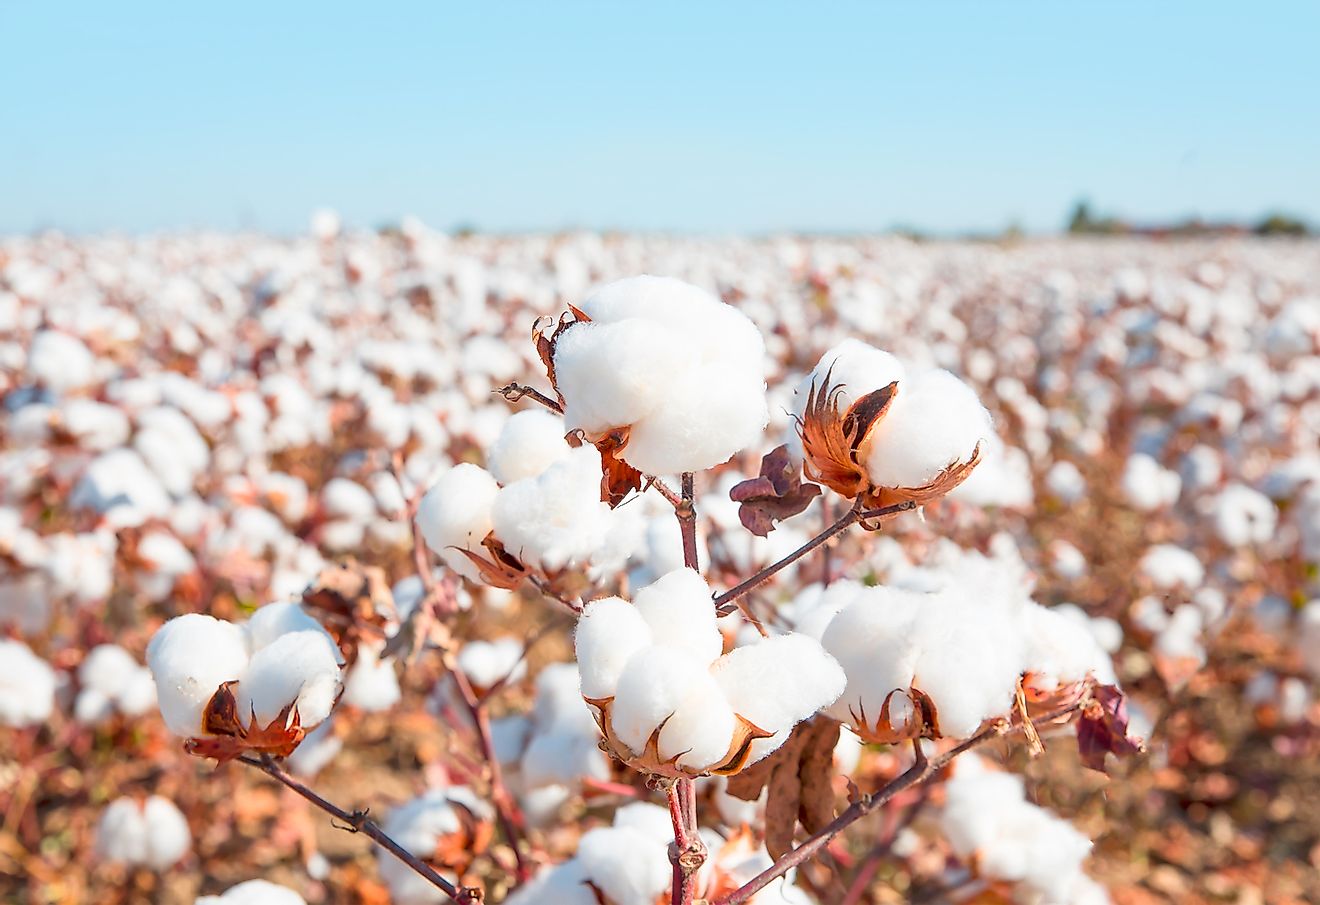 Cotton growing in a field. Image credit: Shutterstock.com